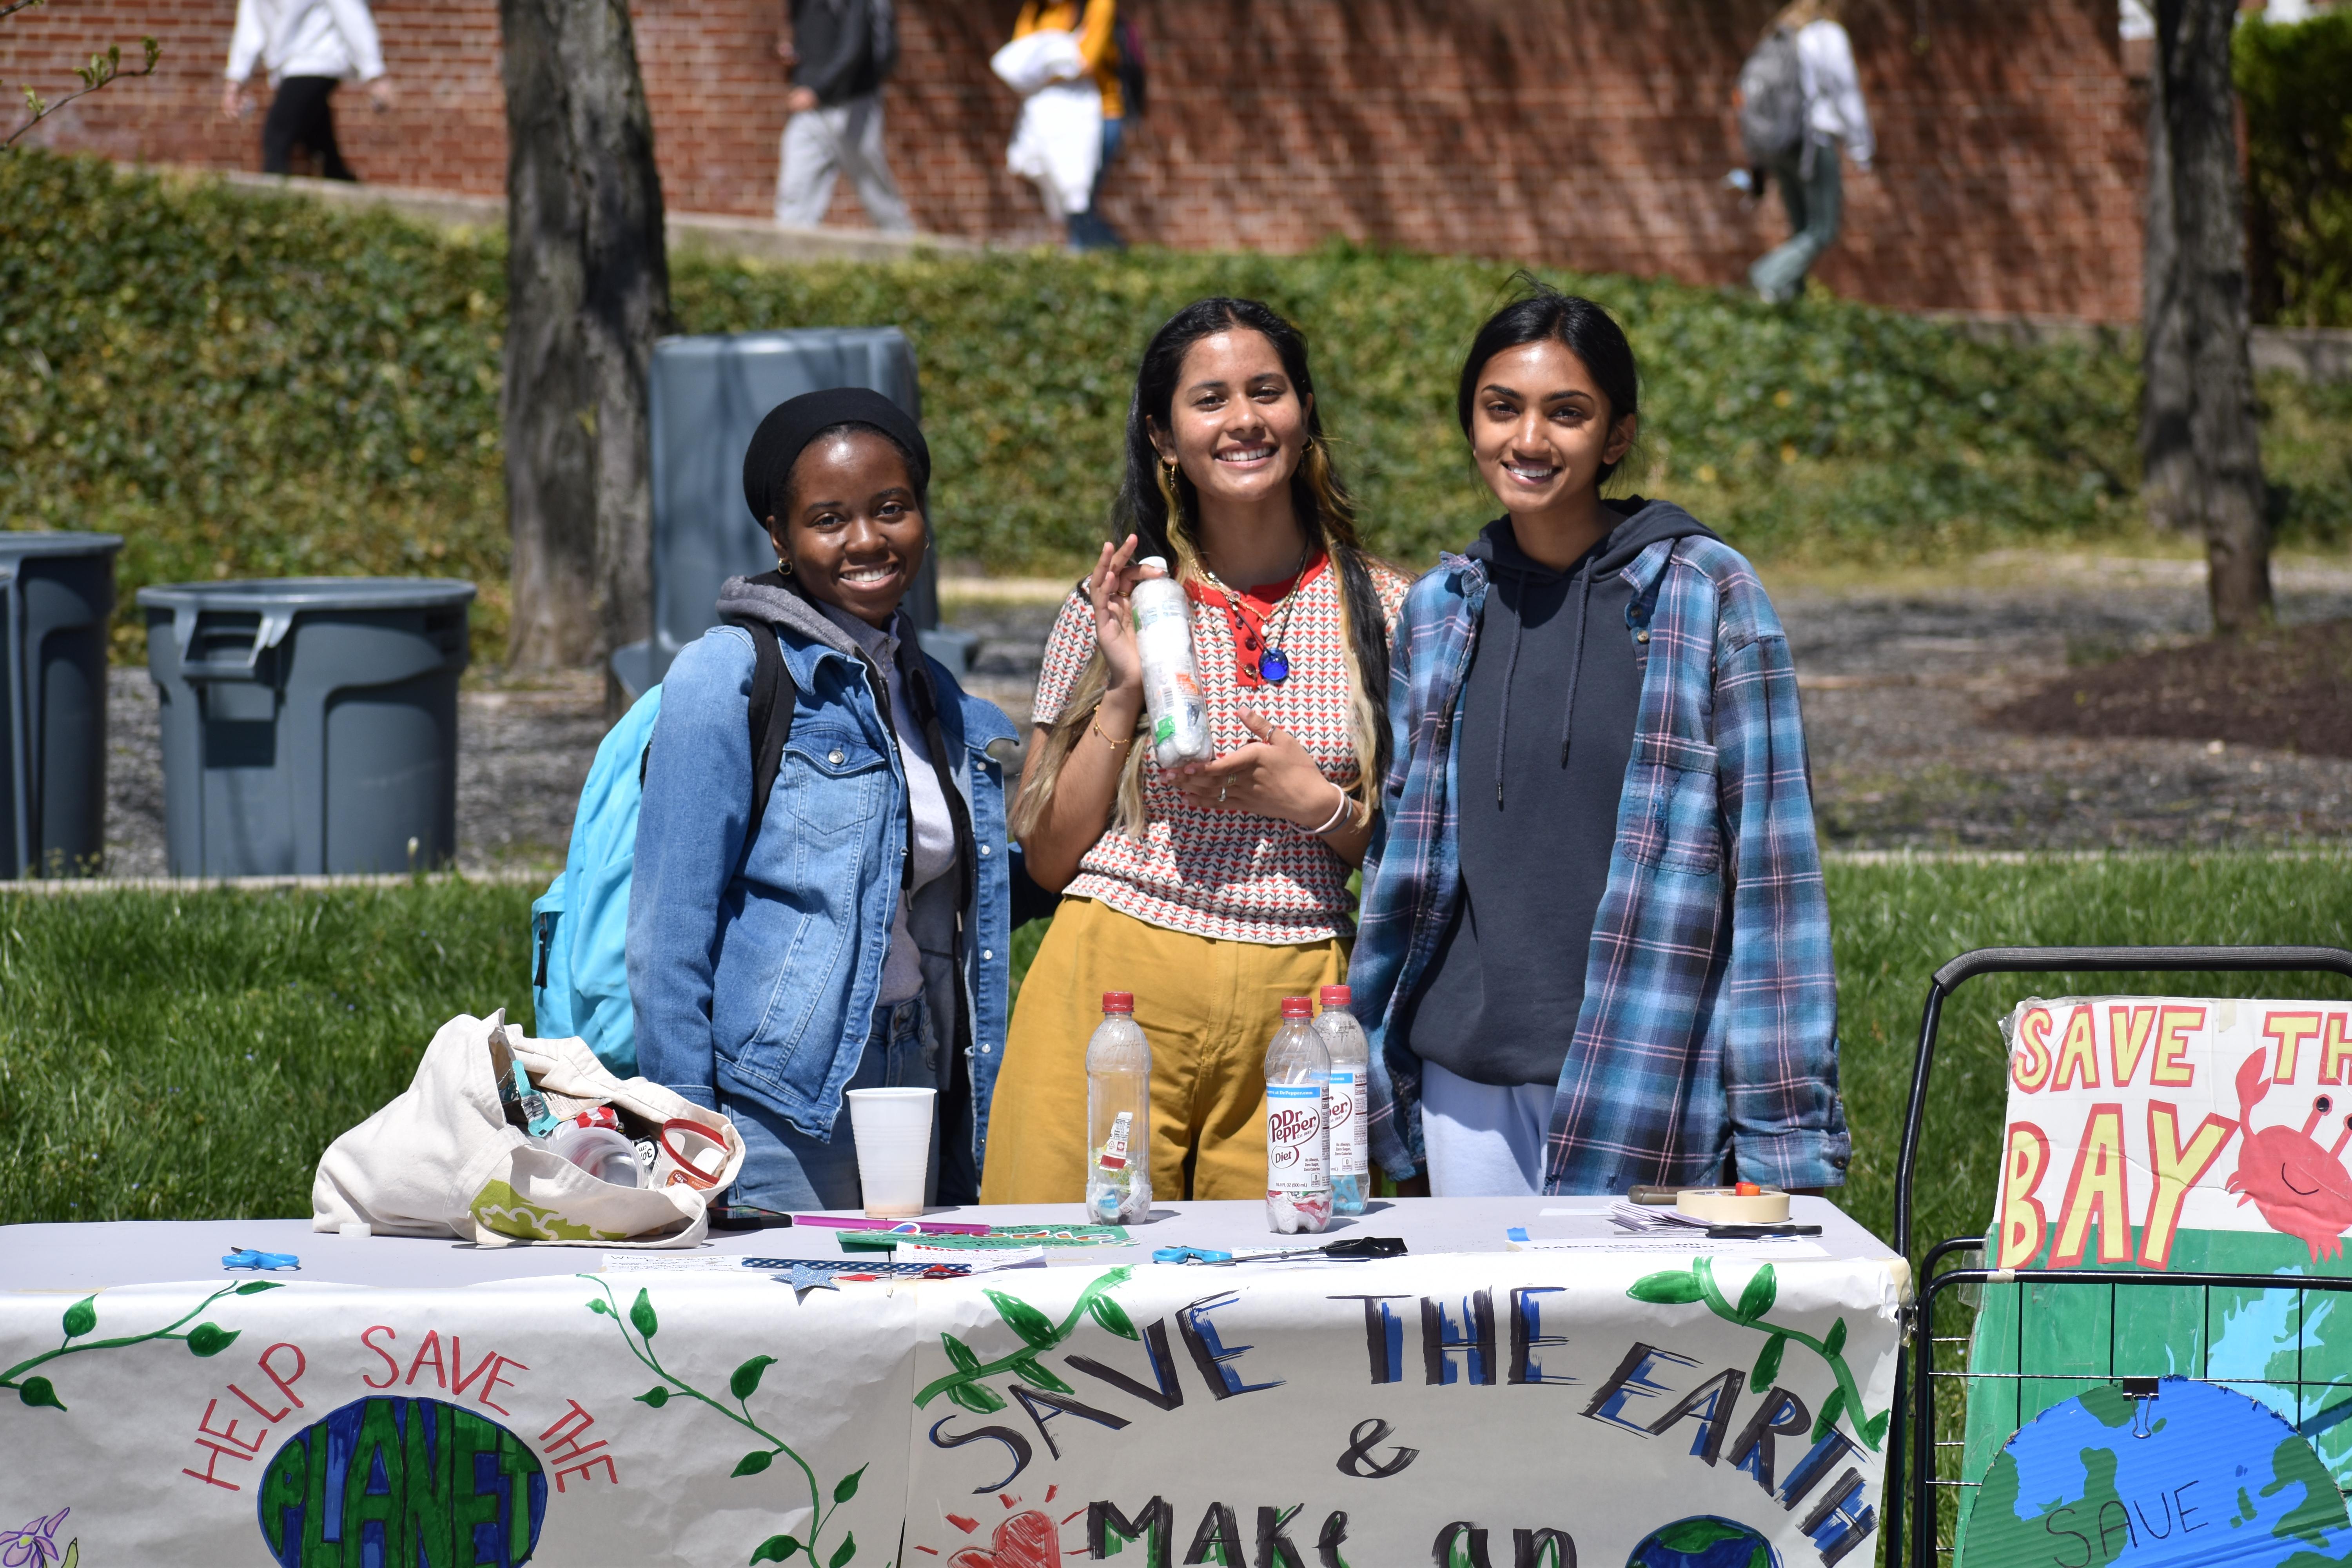 Students tabling 